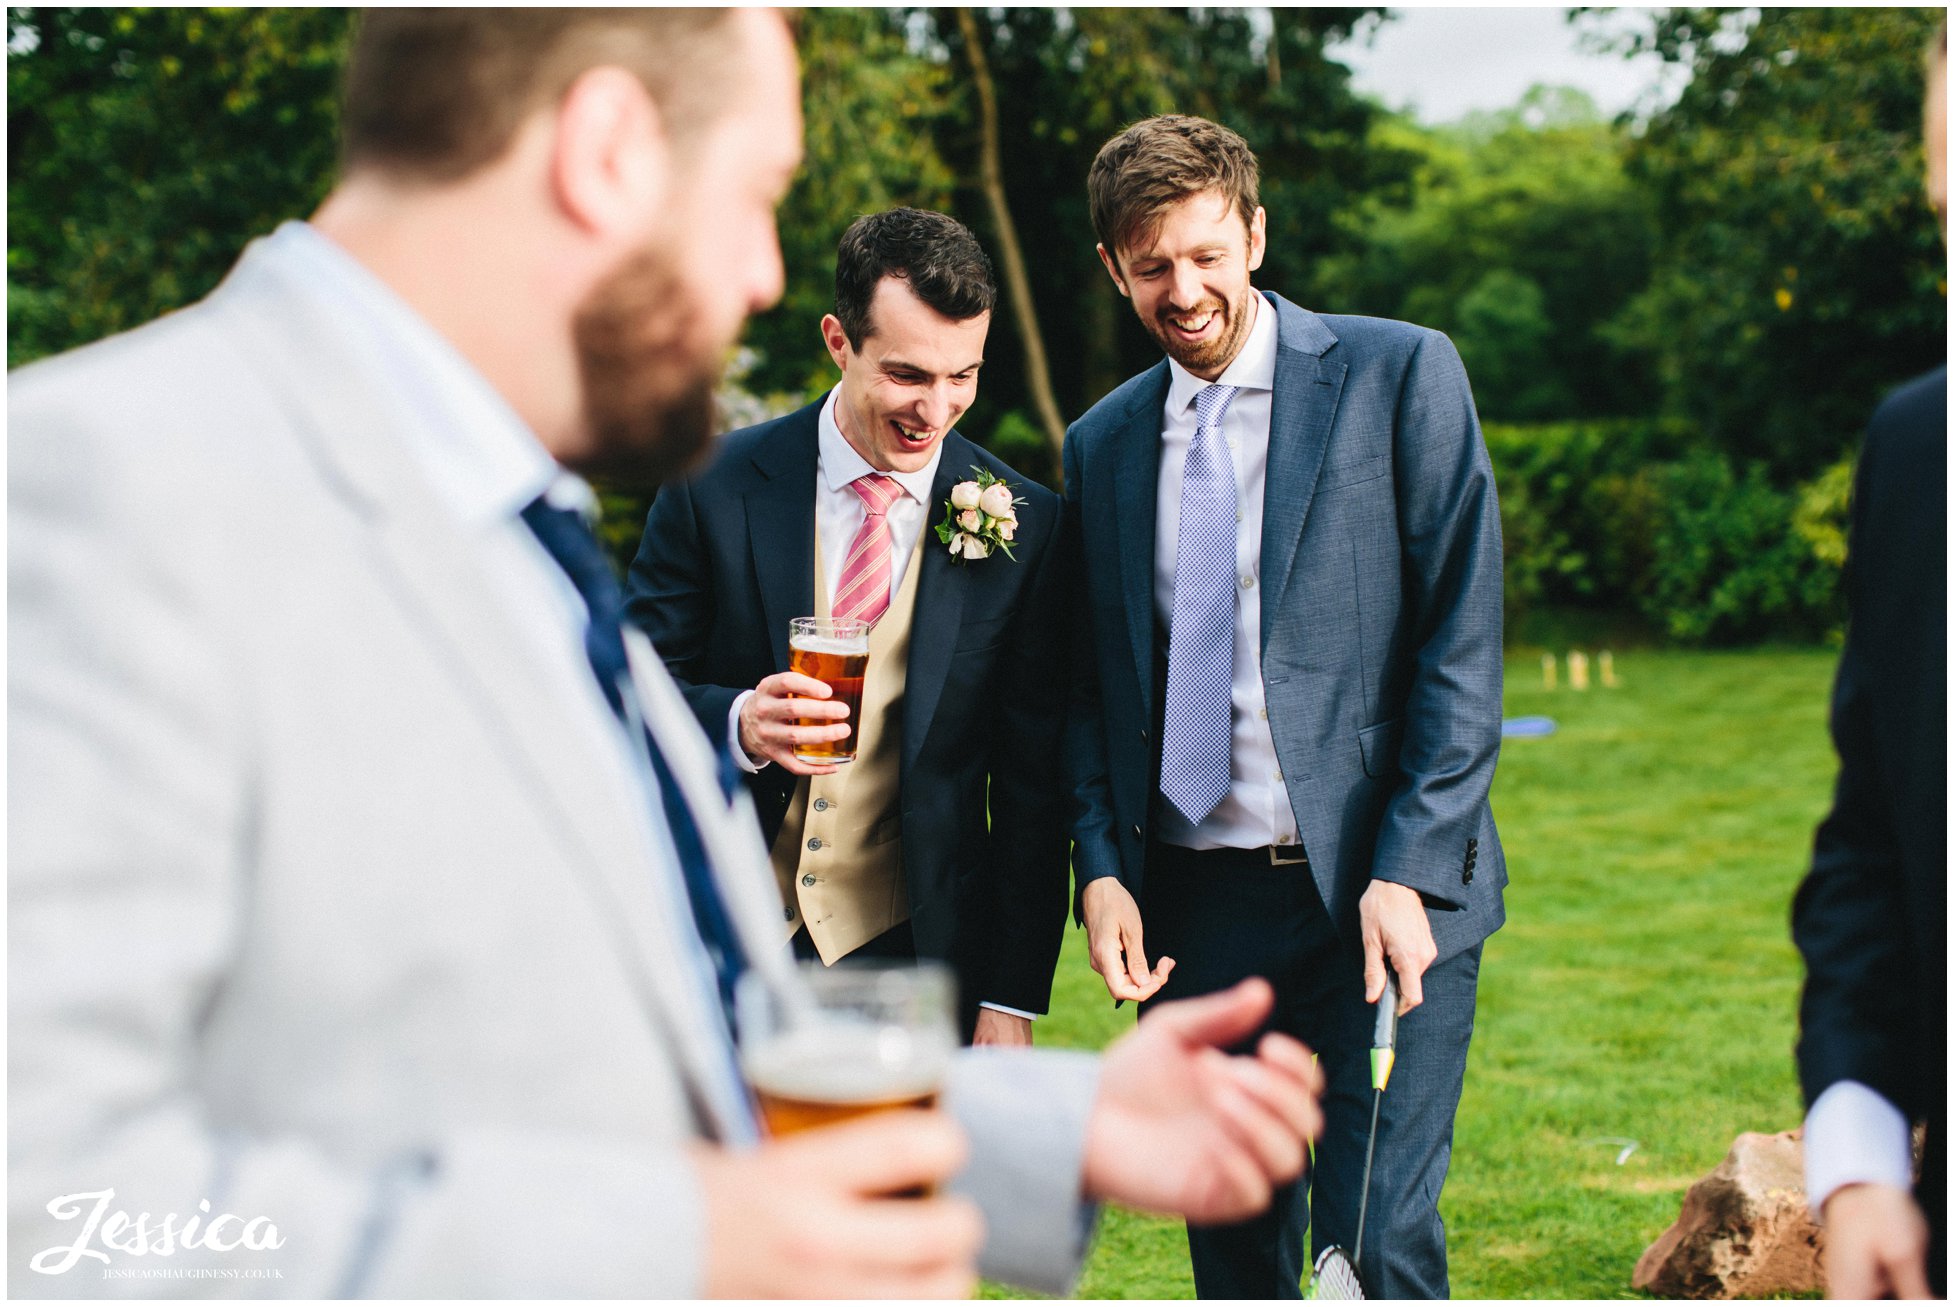 groom jokes with friends in the venue gardens